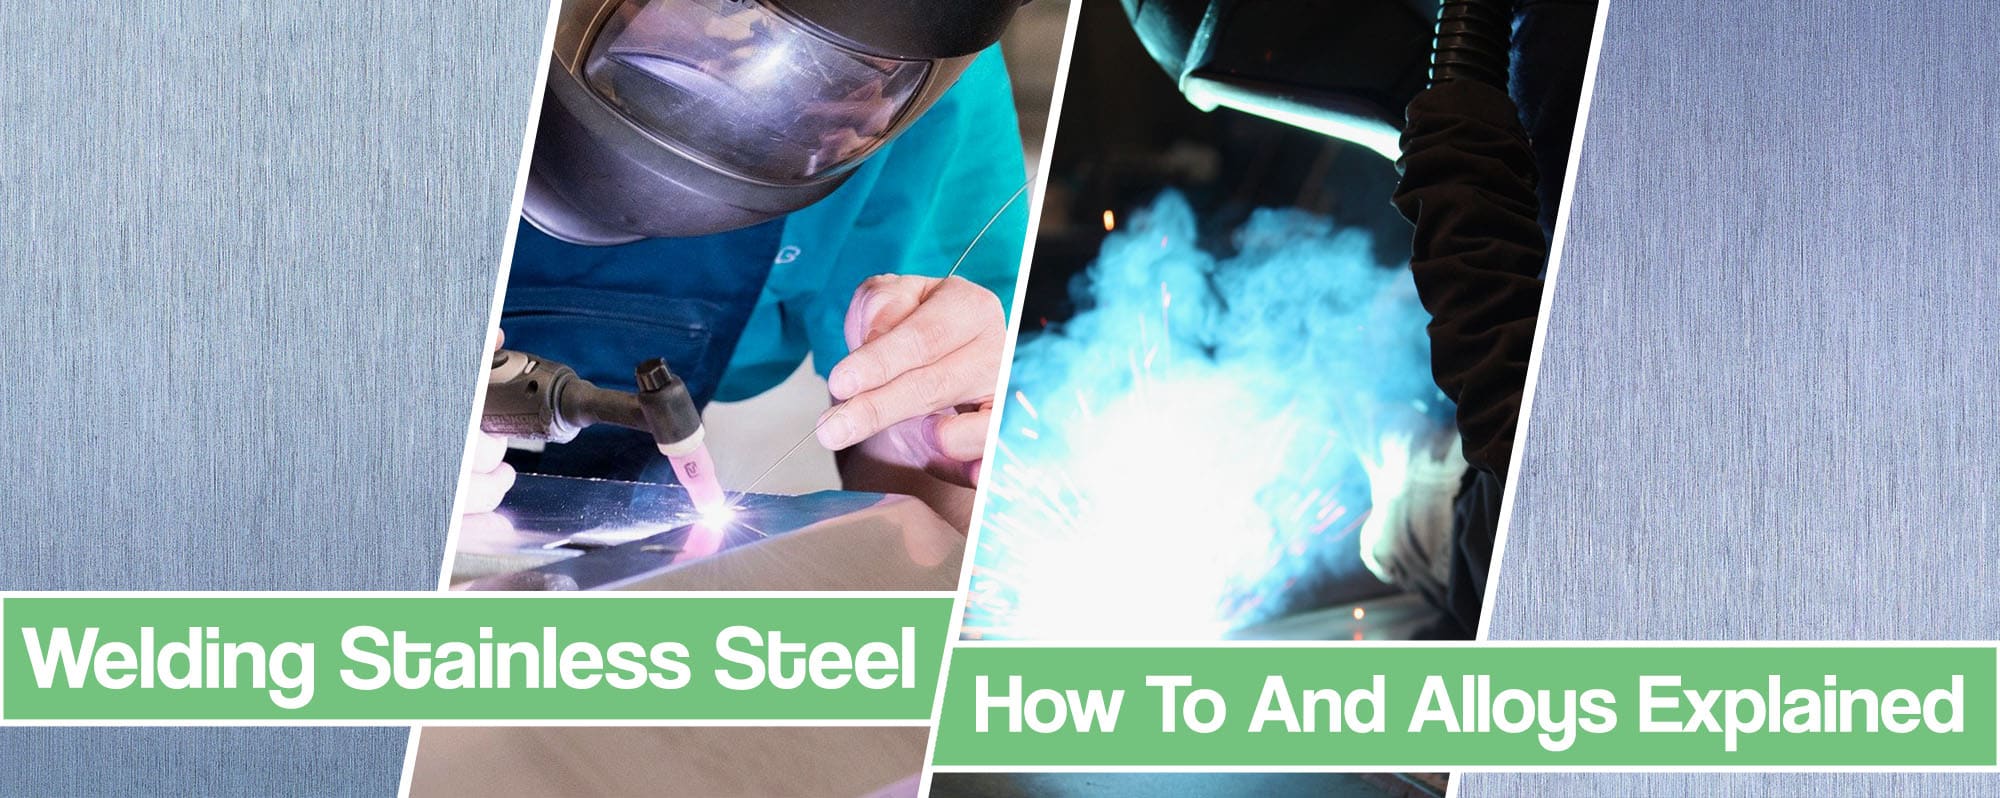 Feature image for Welding Stainless Steel article